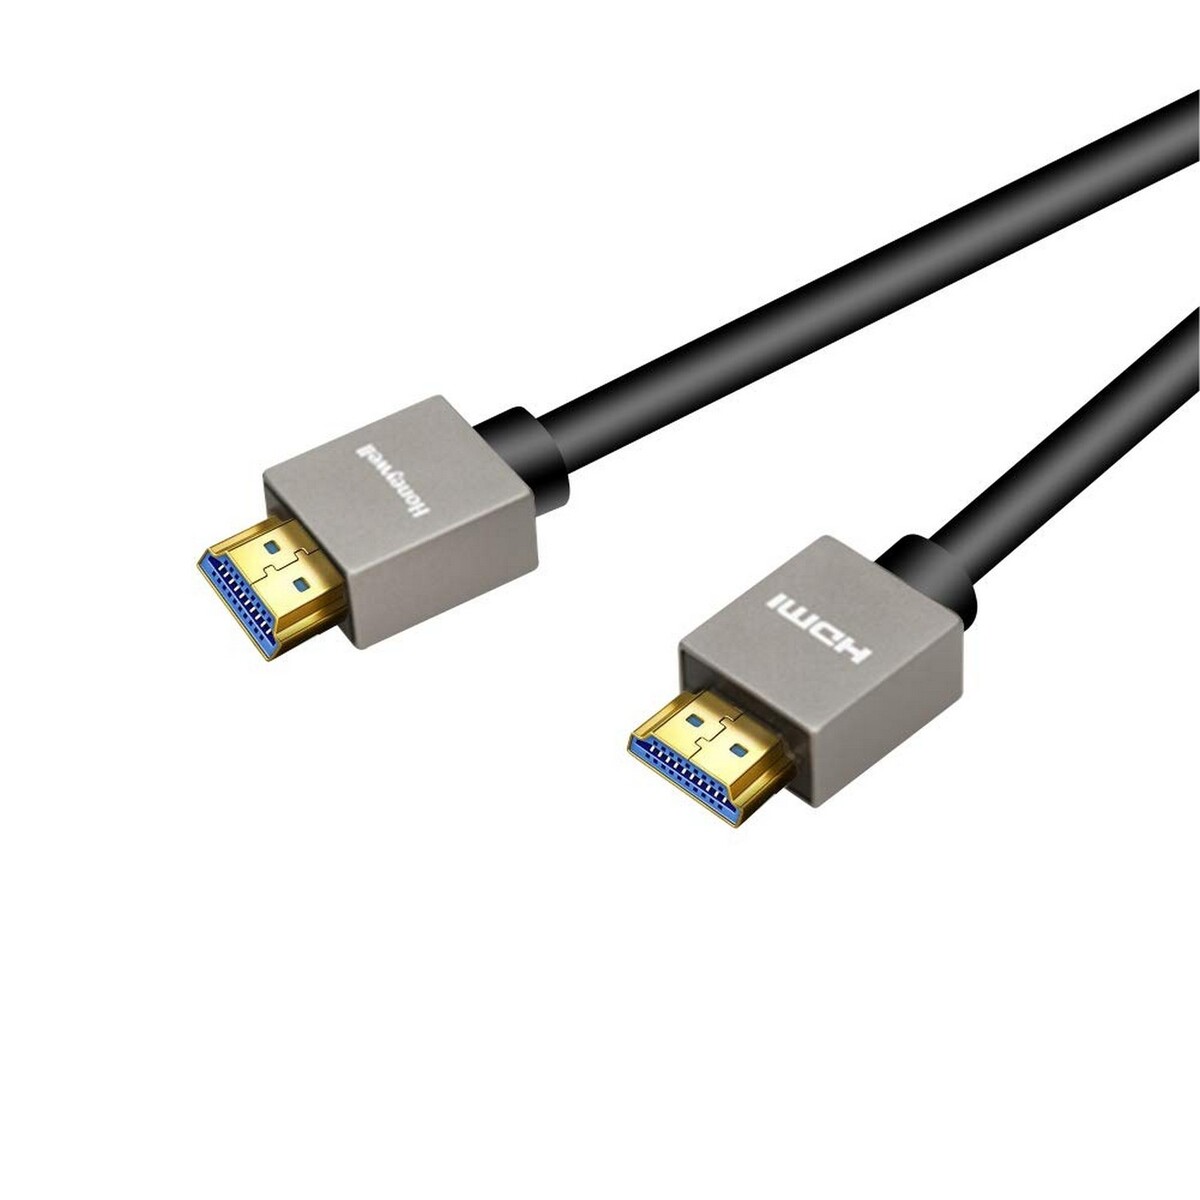 Honeywell HDMI to HDMI Cable with Ethernet 5 Meter